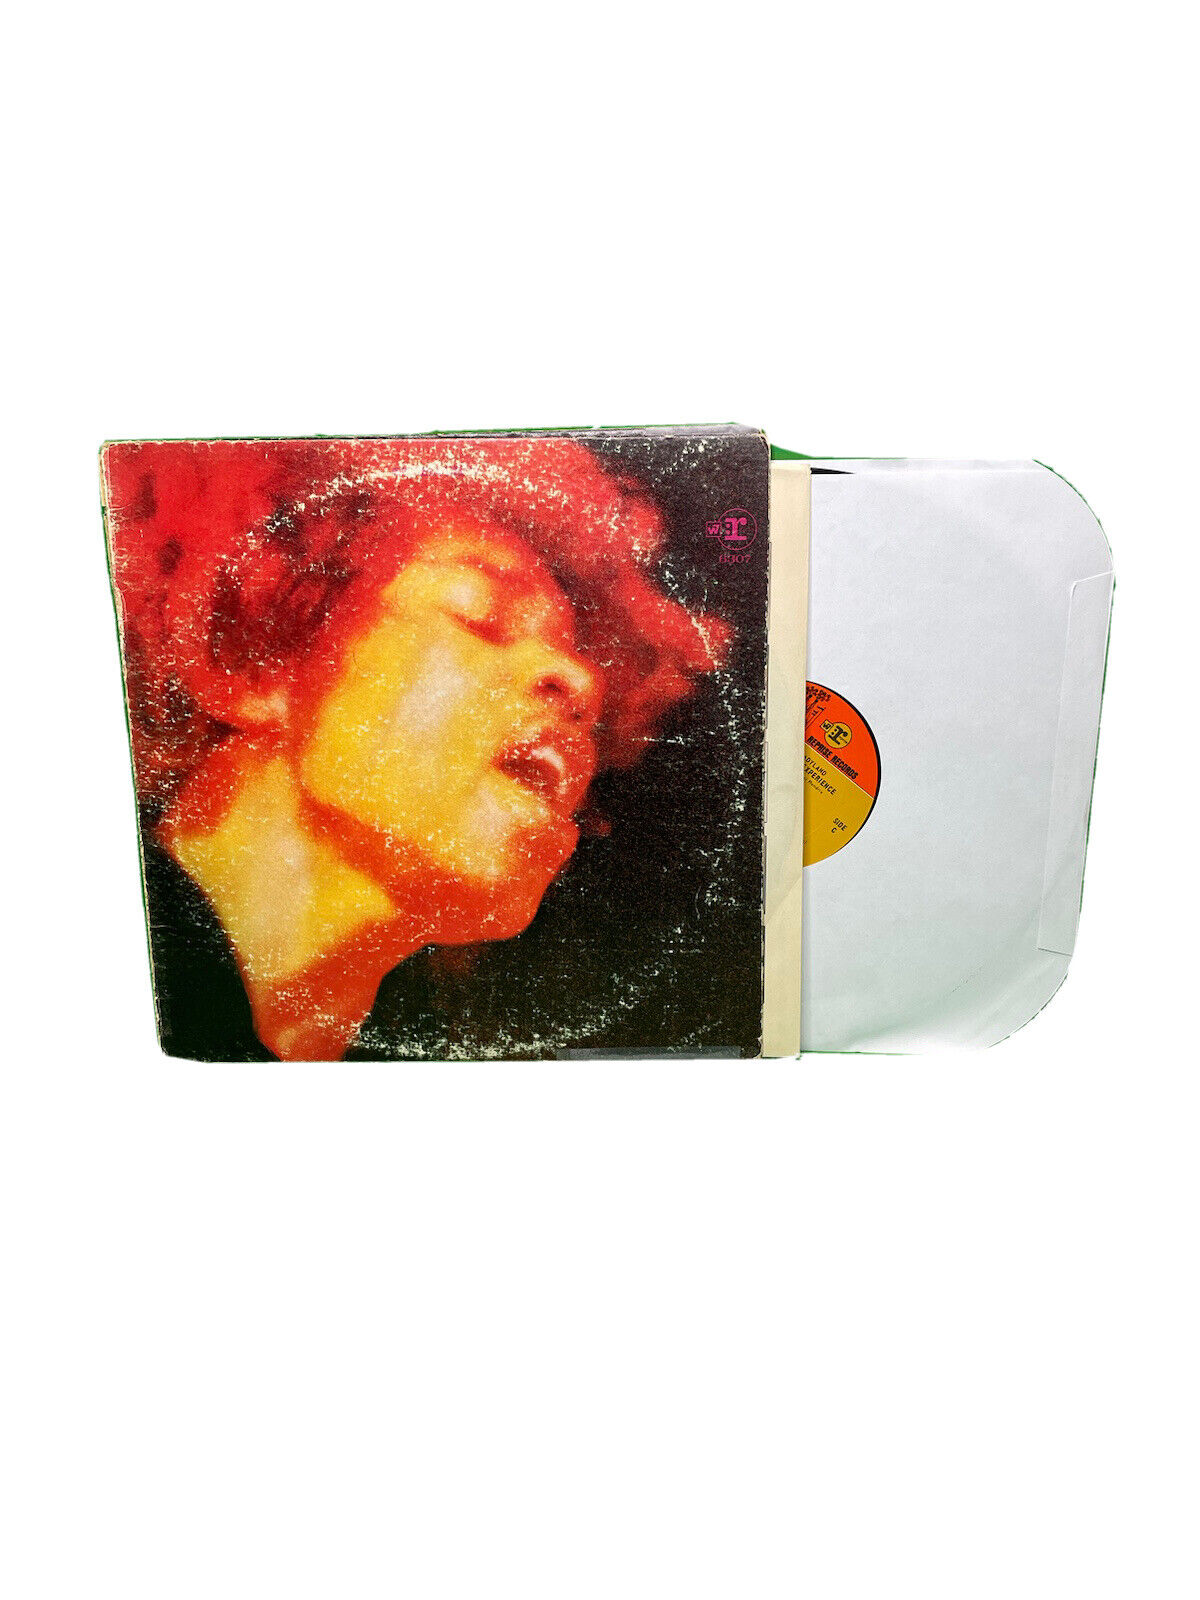 2-LP, Jimi Hendrix Experience, Electric Ladyland, Reprise 2 RS 6307 1979 G- G